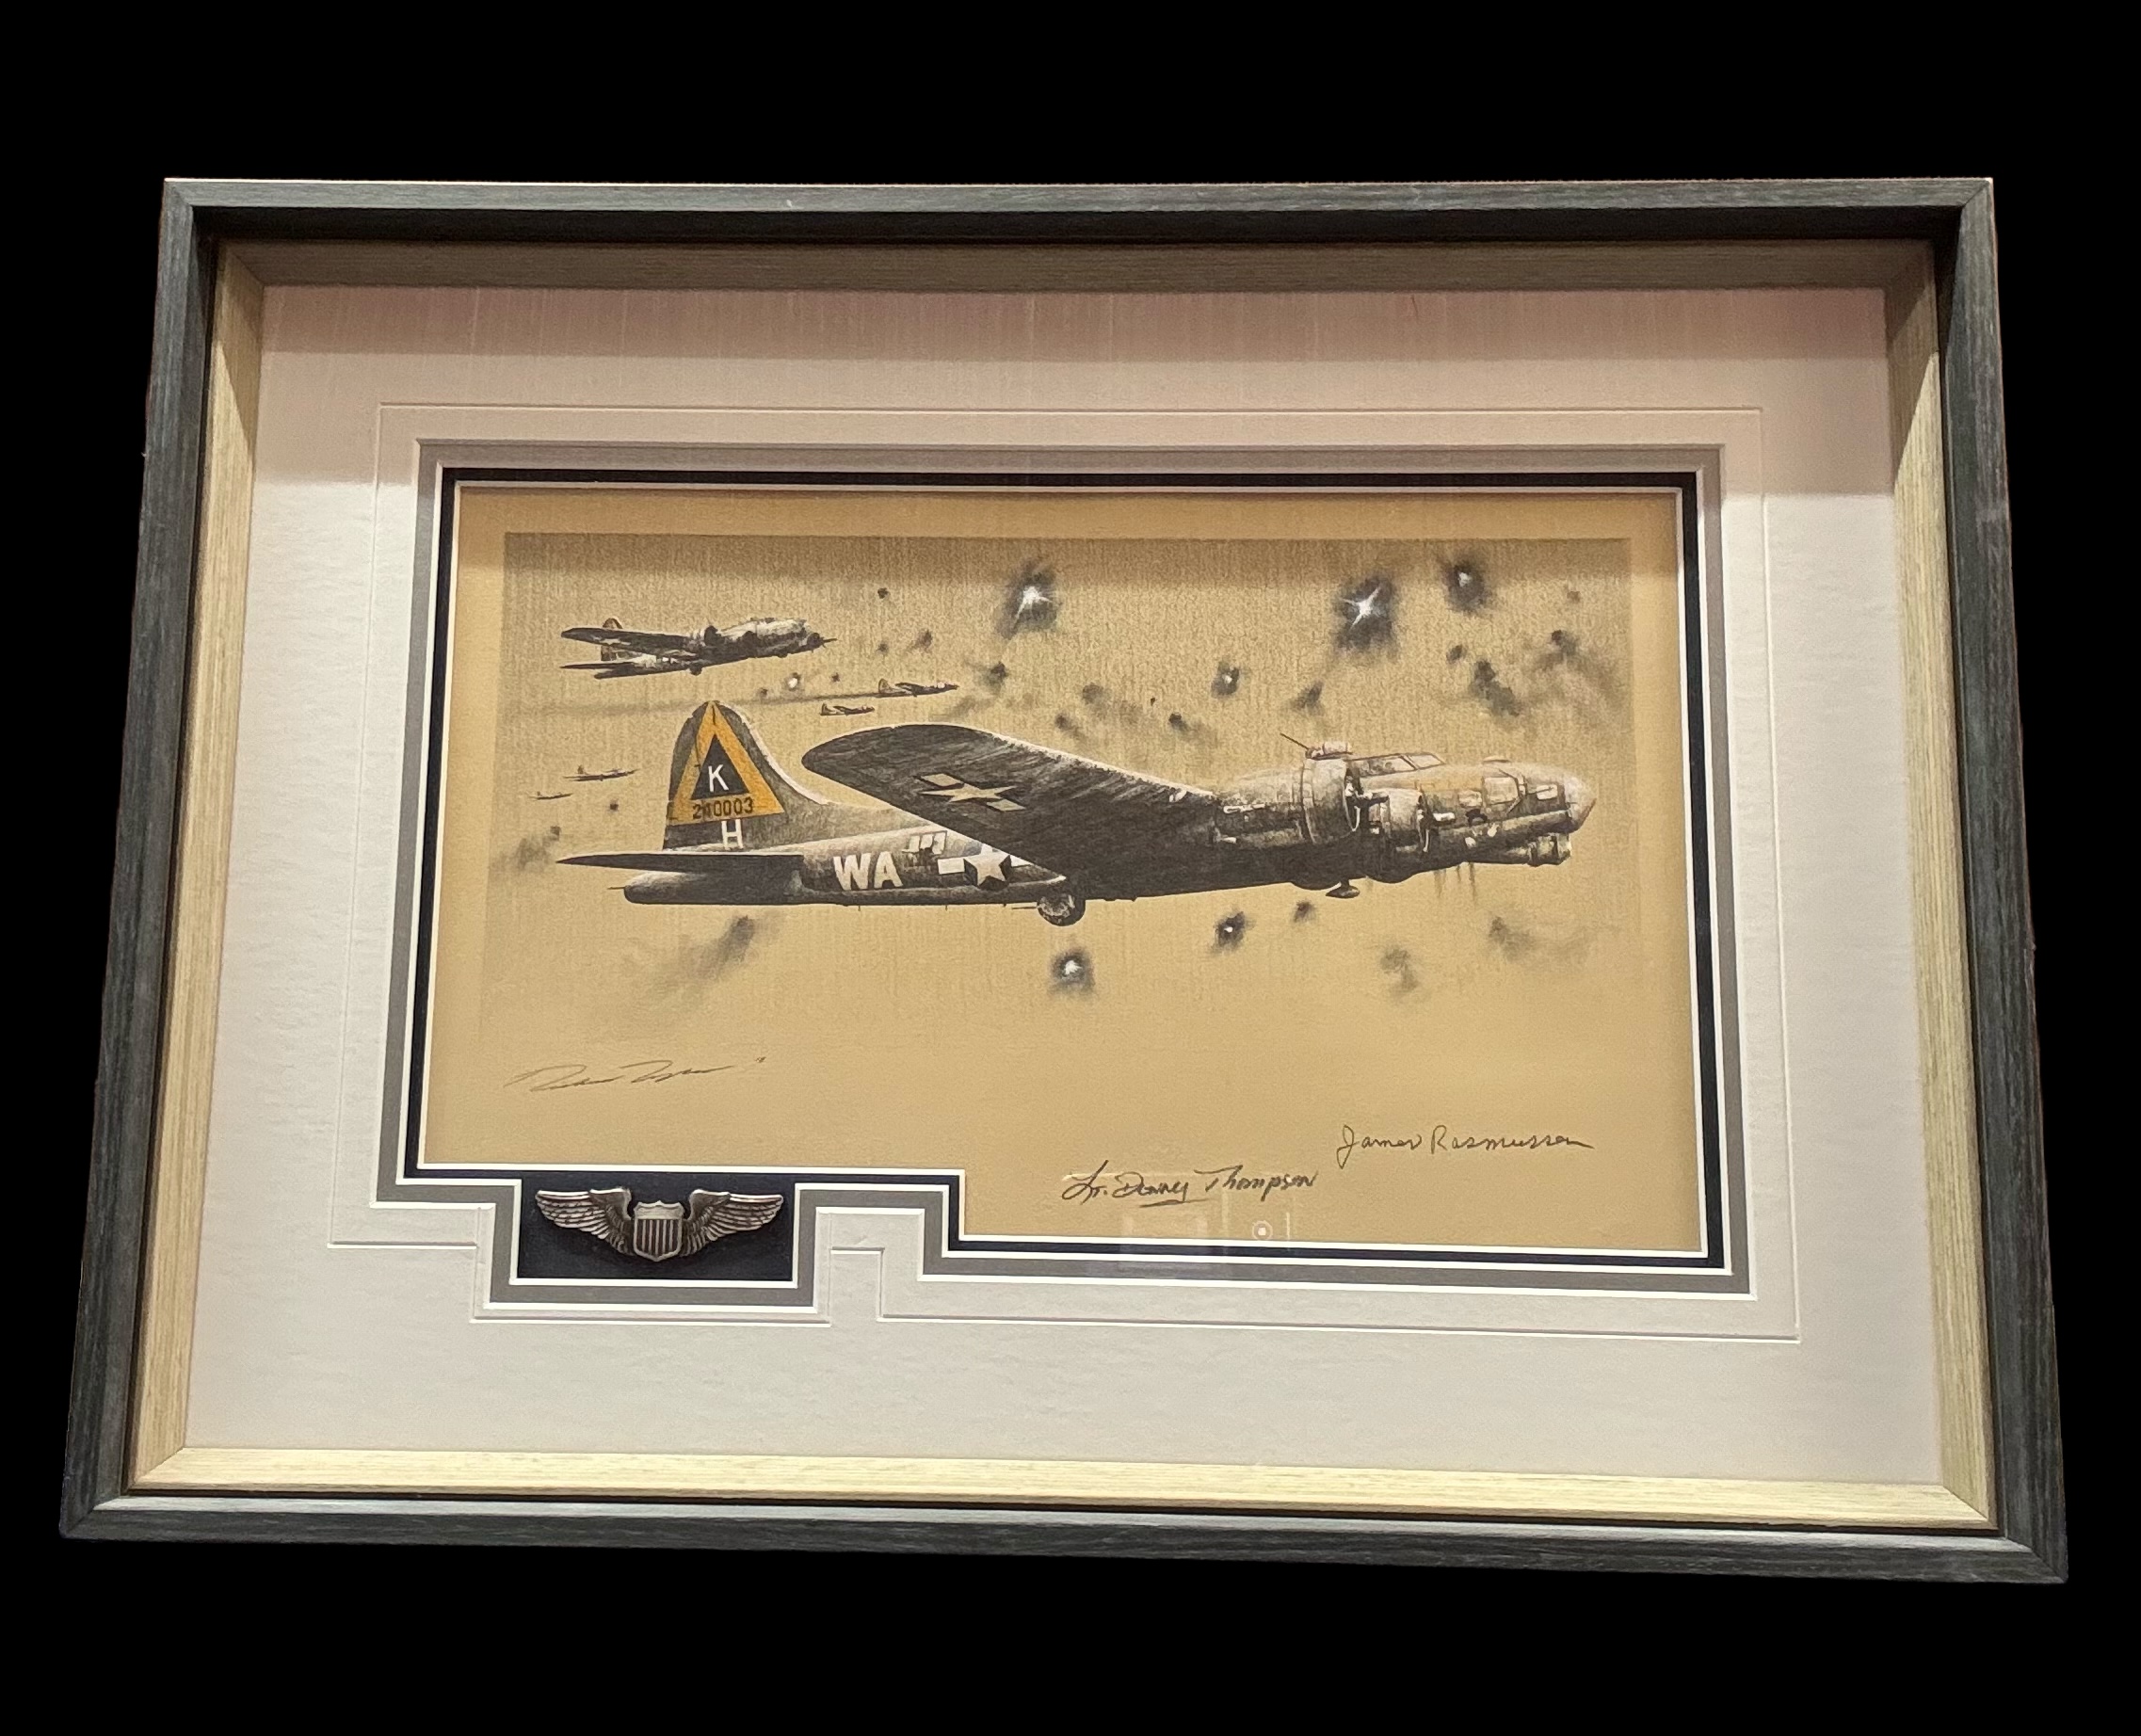 USAF WWII Bomber 23x17 inch framed and mounted print signed in pencil by the artist Robert Taylor